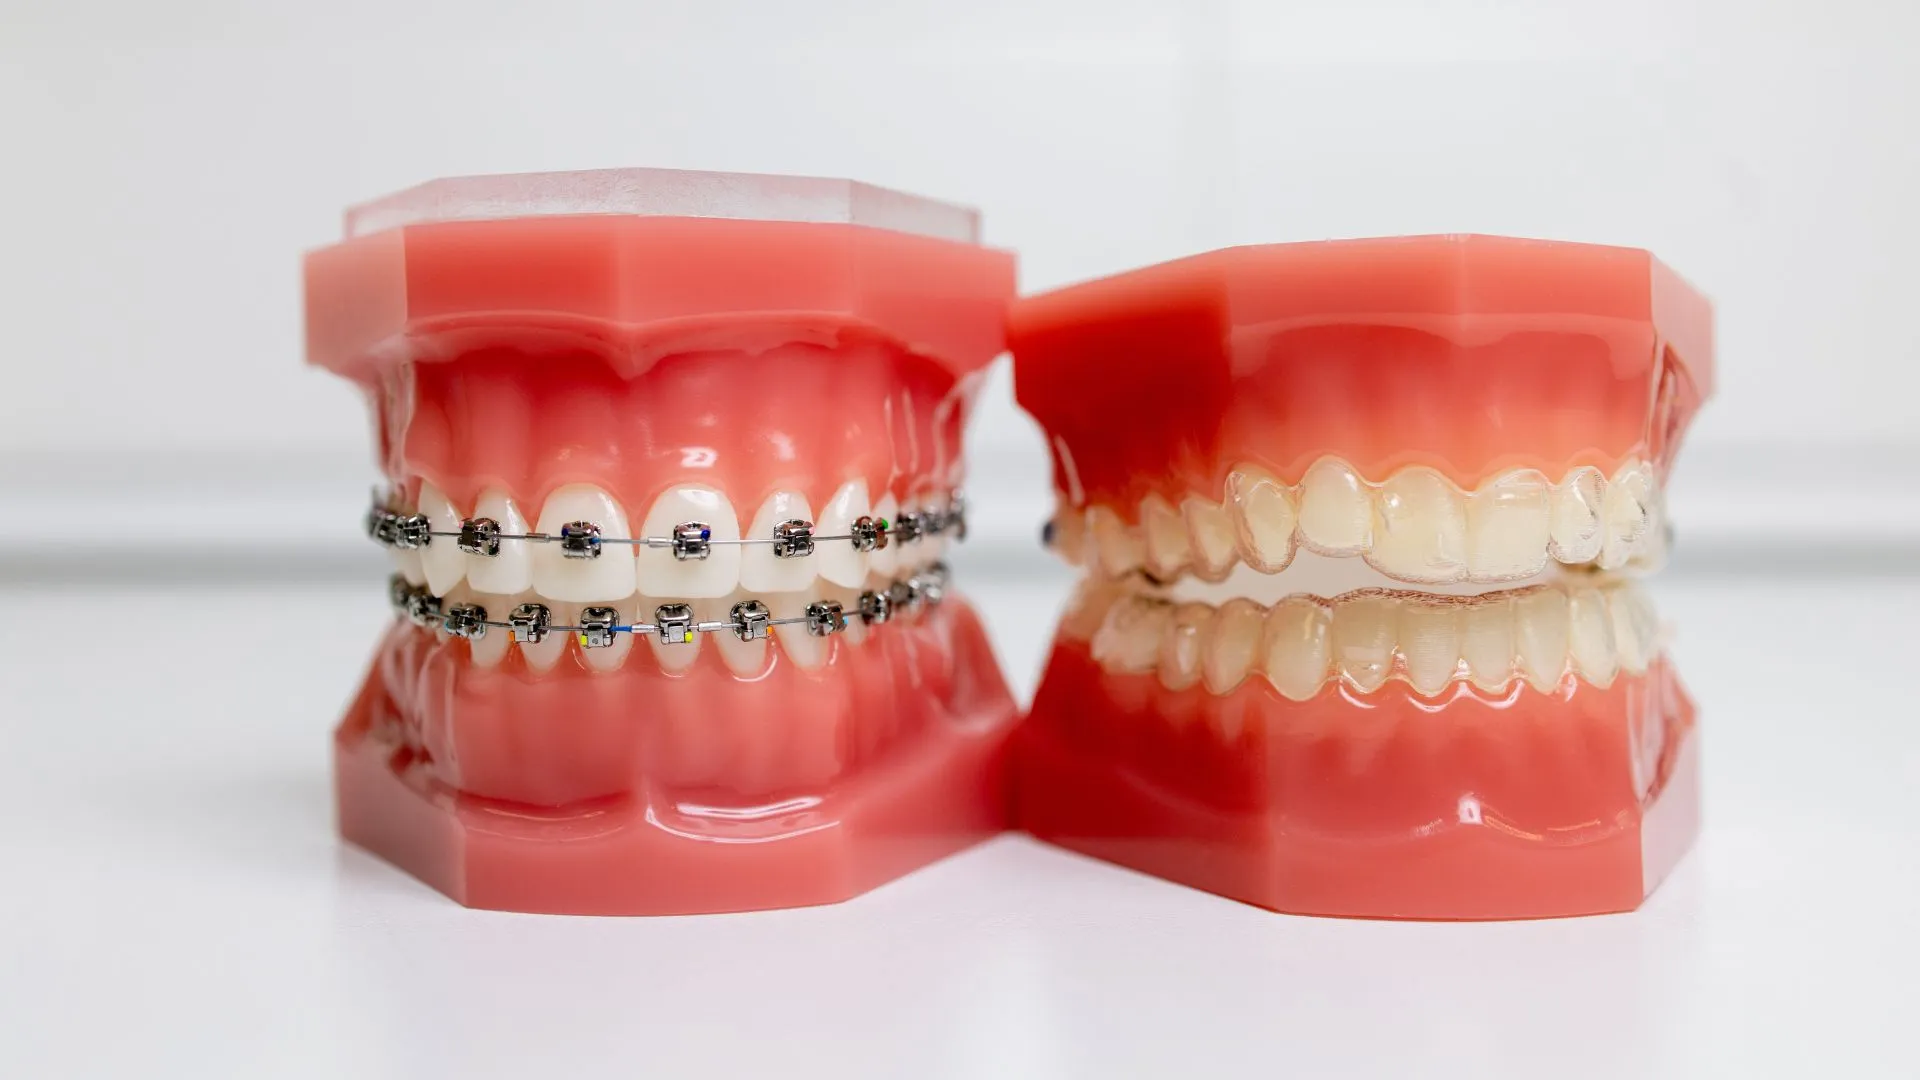 Invisalign Is a Great Alternative to Traditional Braces